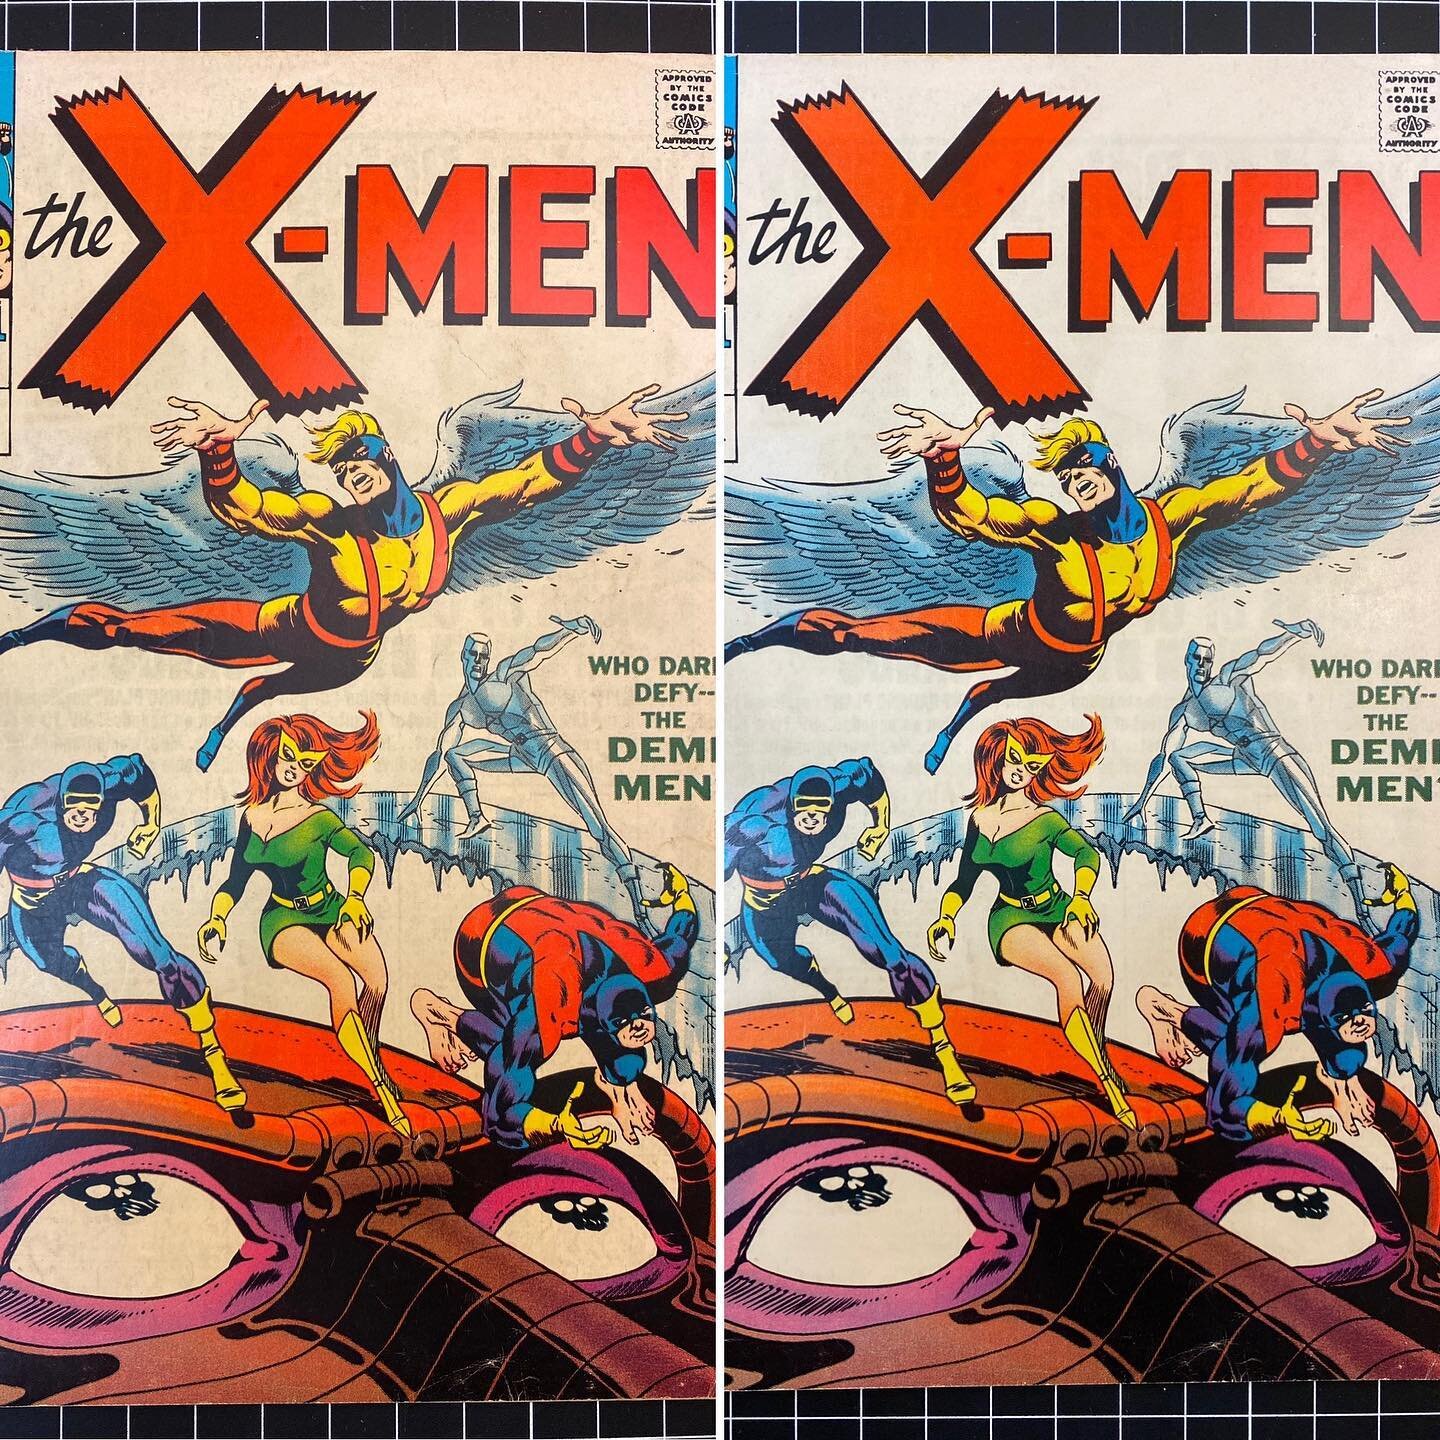 Steranko X-Men goodness crisply pops from the page via #comicpressing &amp; #comiccleaning. Upgrade your #comicbooks #comiccollection or #comicinventory with @comic_presser, first book FREE thru Aug 31. Link in bio, discount codes on site. Follow us 